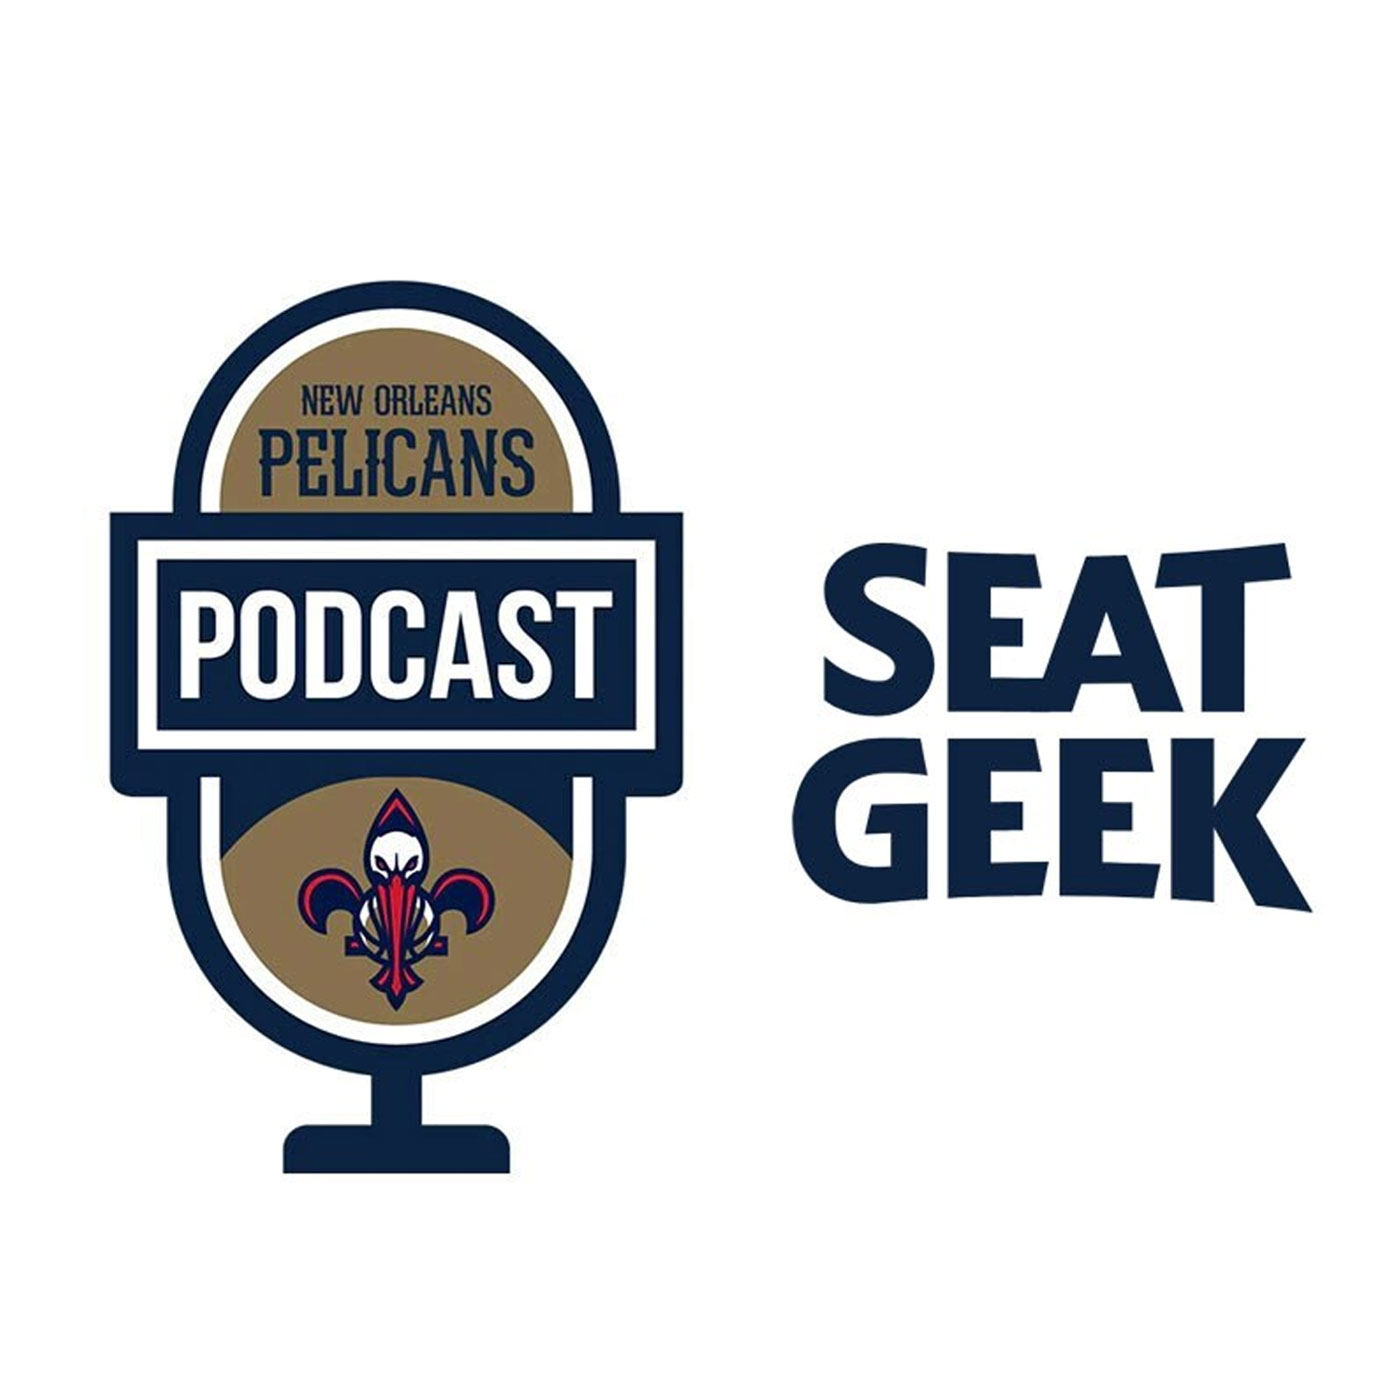 Michael Wright on the New Orleans Pelicans Podcast presented by SeatGeek - November 17, 2021